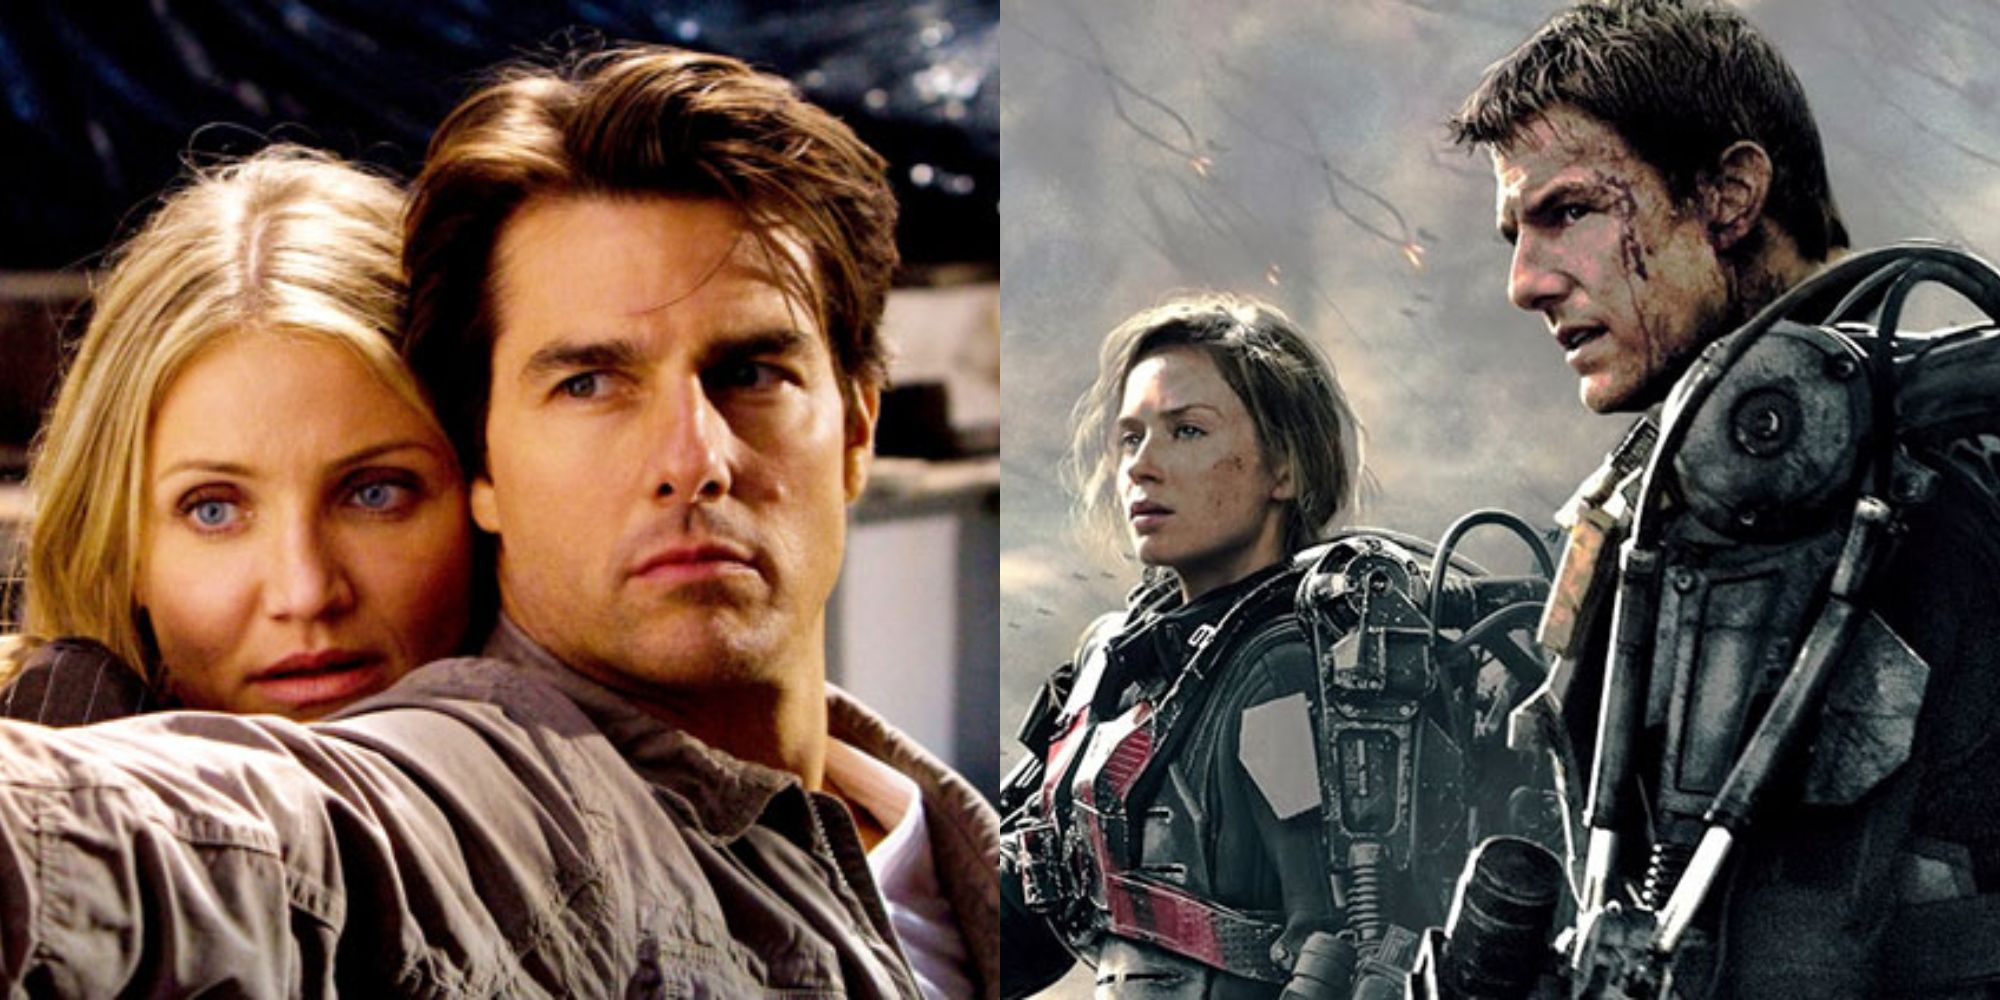 Split image showing the main characters from Knight & Day and Edge of Tomorrow.